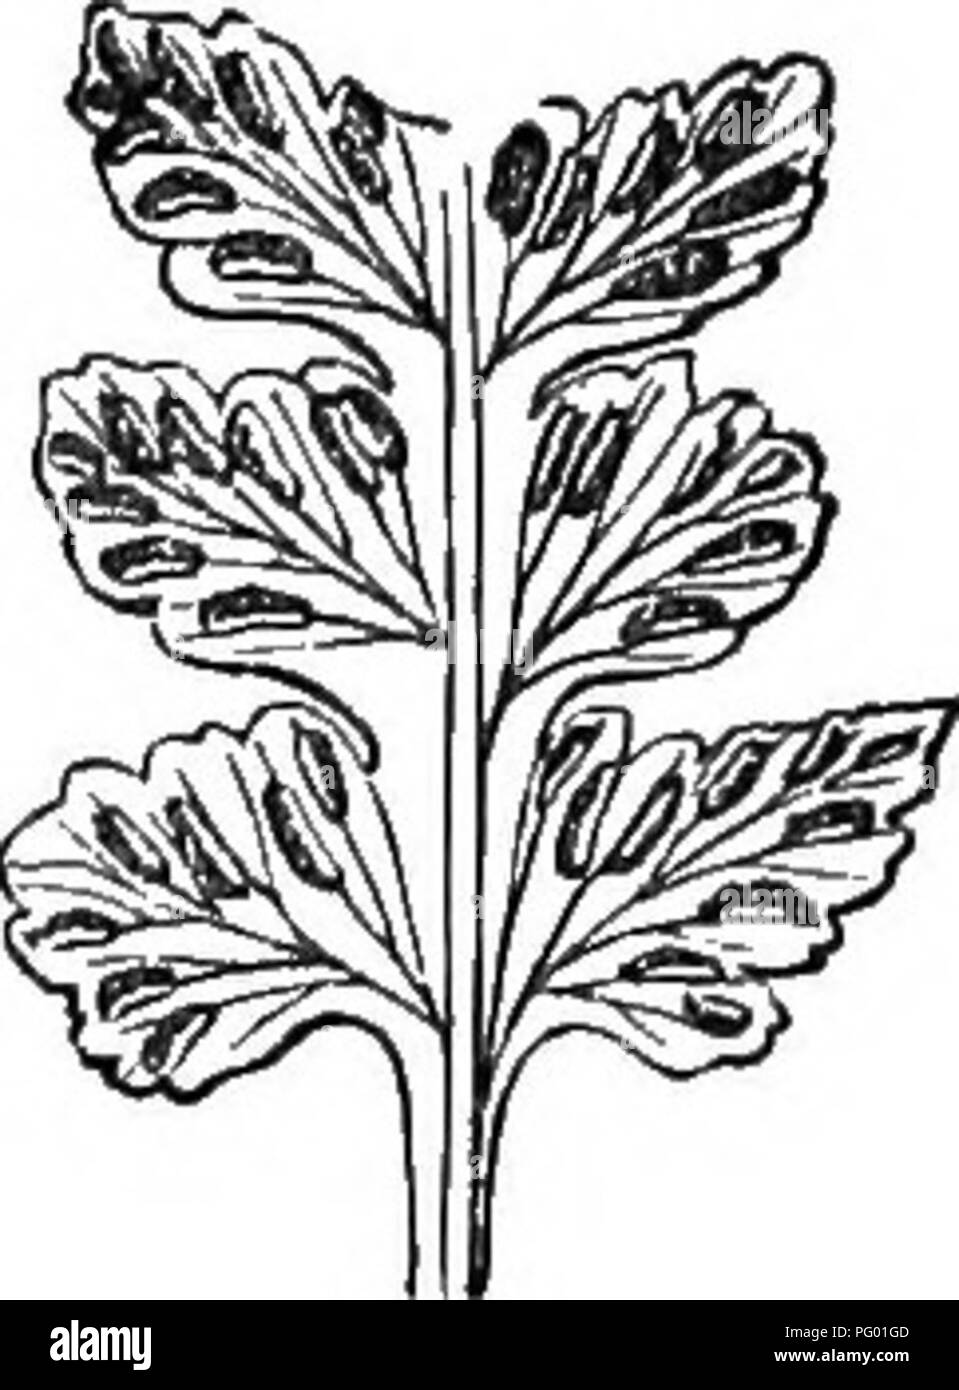 . A natural history of new and rare ferns : containing species and varieties, none of which are included in any of the eight volumes of &quot;Ferns, British and exotic&quot;, amongst which are the new hymenophyllums and Trichomanes . Ferns. rortion of fertile Frond, under side. ASPLENIUM PINNATIFIDUM. NuTTALL. Hooker. A. Gray. Mettenius. Sprengel. Presl. Fee. Kunze. PLATE IV. B. Asplenium rhizophyllum, var. pinnatifidum, Barton. Asplenium—Spleenwort. Pinnatifidum—Pinnatifid. In the Section Euasplenium of Authoks. A GREENHOUSE species. Native of the United States of America, Philadelphia, AUegh Stock Photo